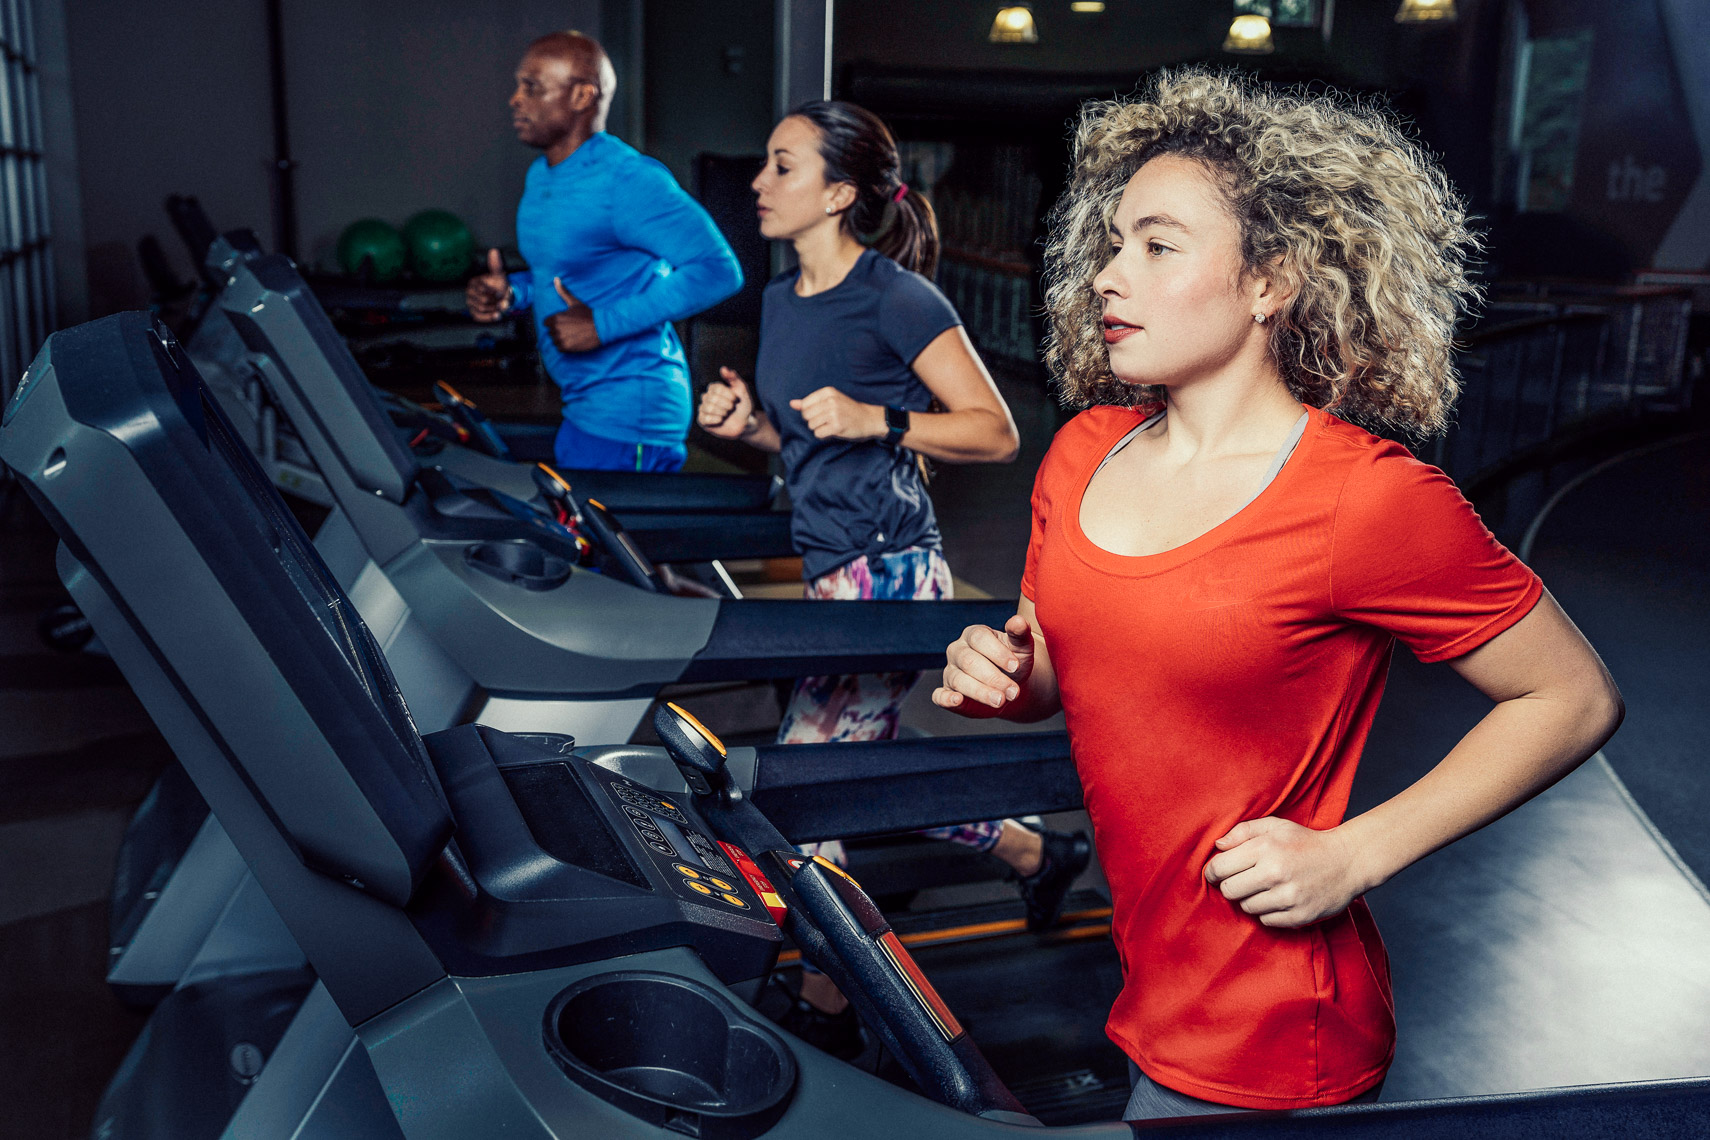 2020_Membership_Campaign_for_YMCA_20191118_photo_by_Justin_Kase_Conder_0412_Retouched_V02